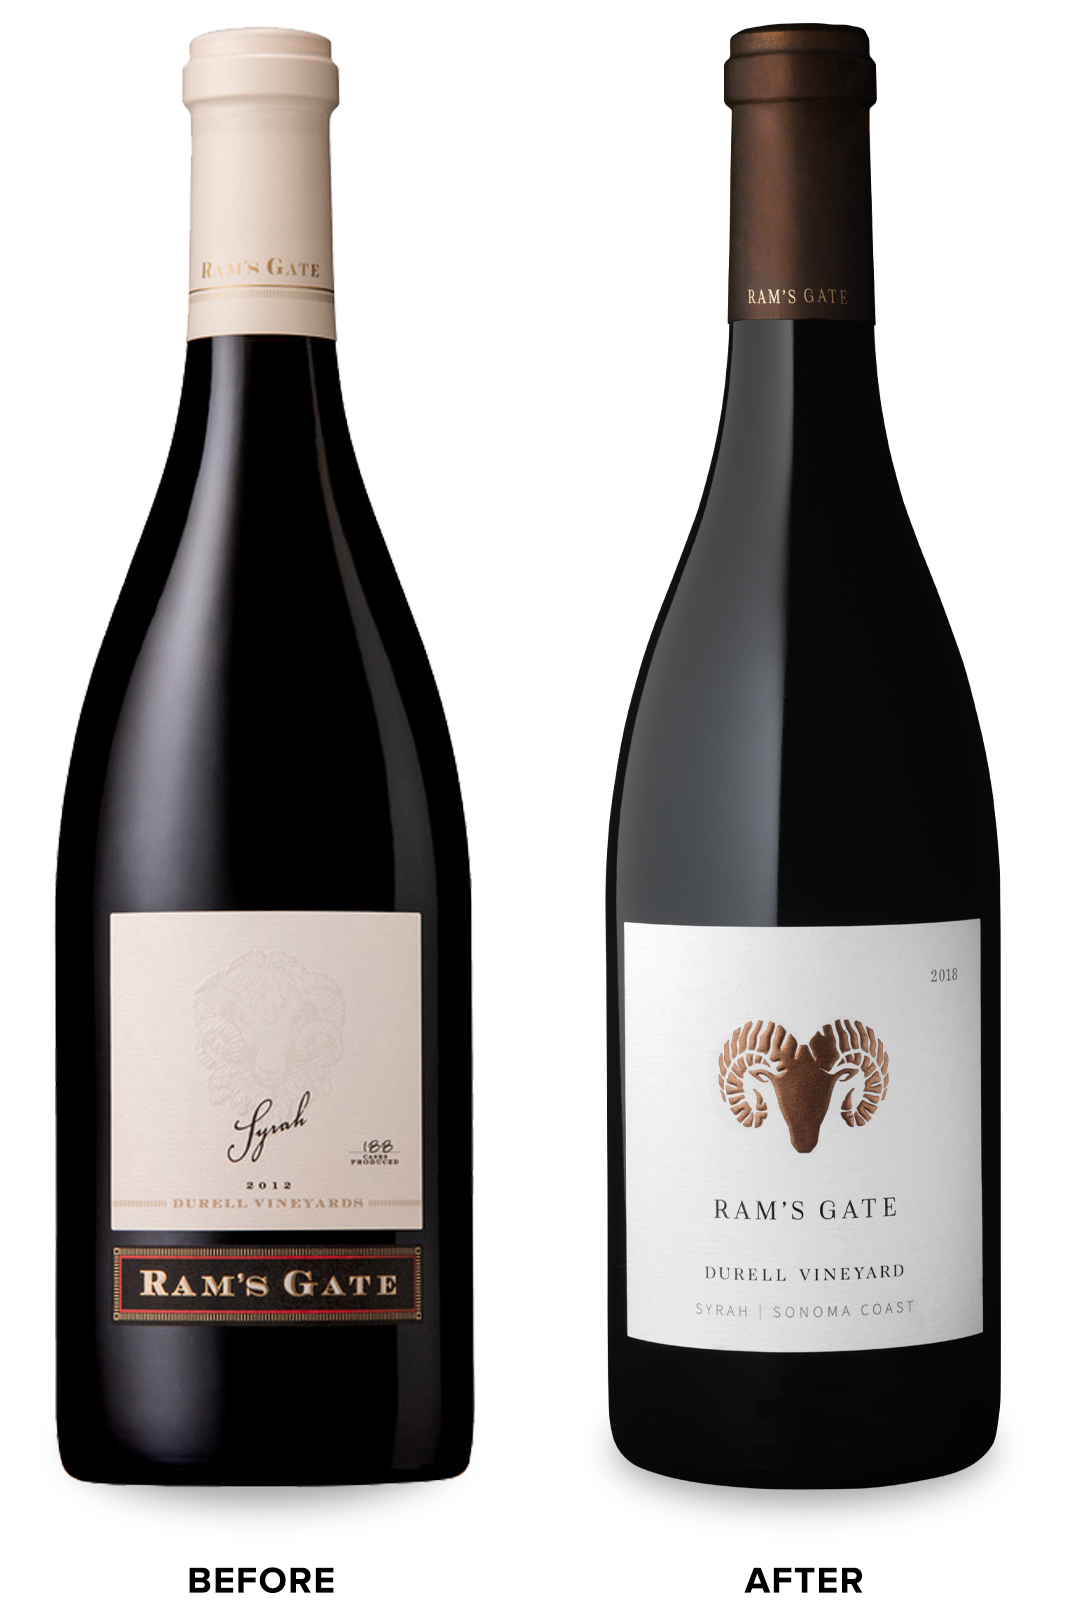 Ram’s Gate Single Vineyard Tier Wine Packaging Before Redesign on Left & After on Right